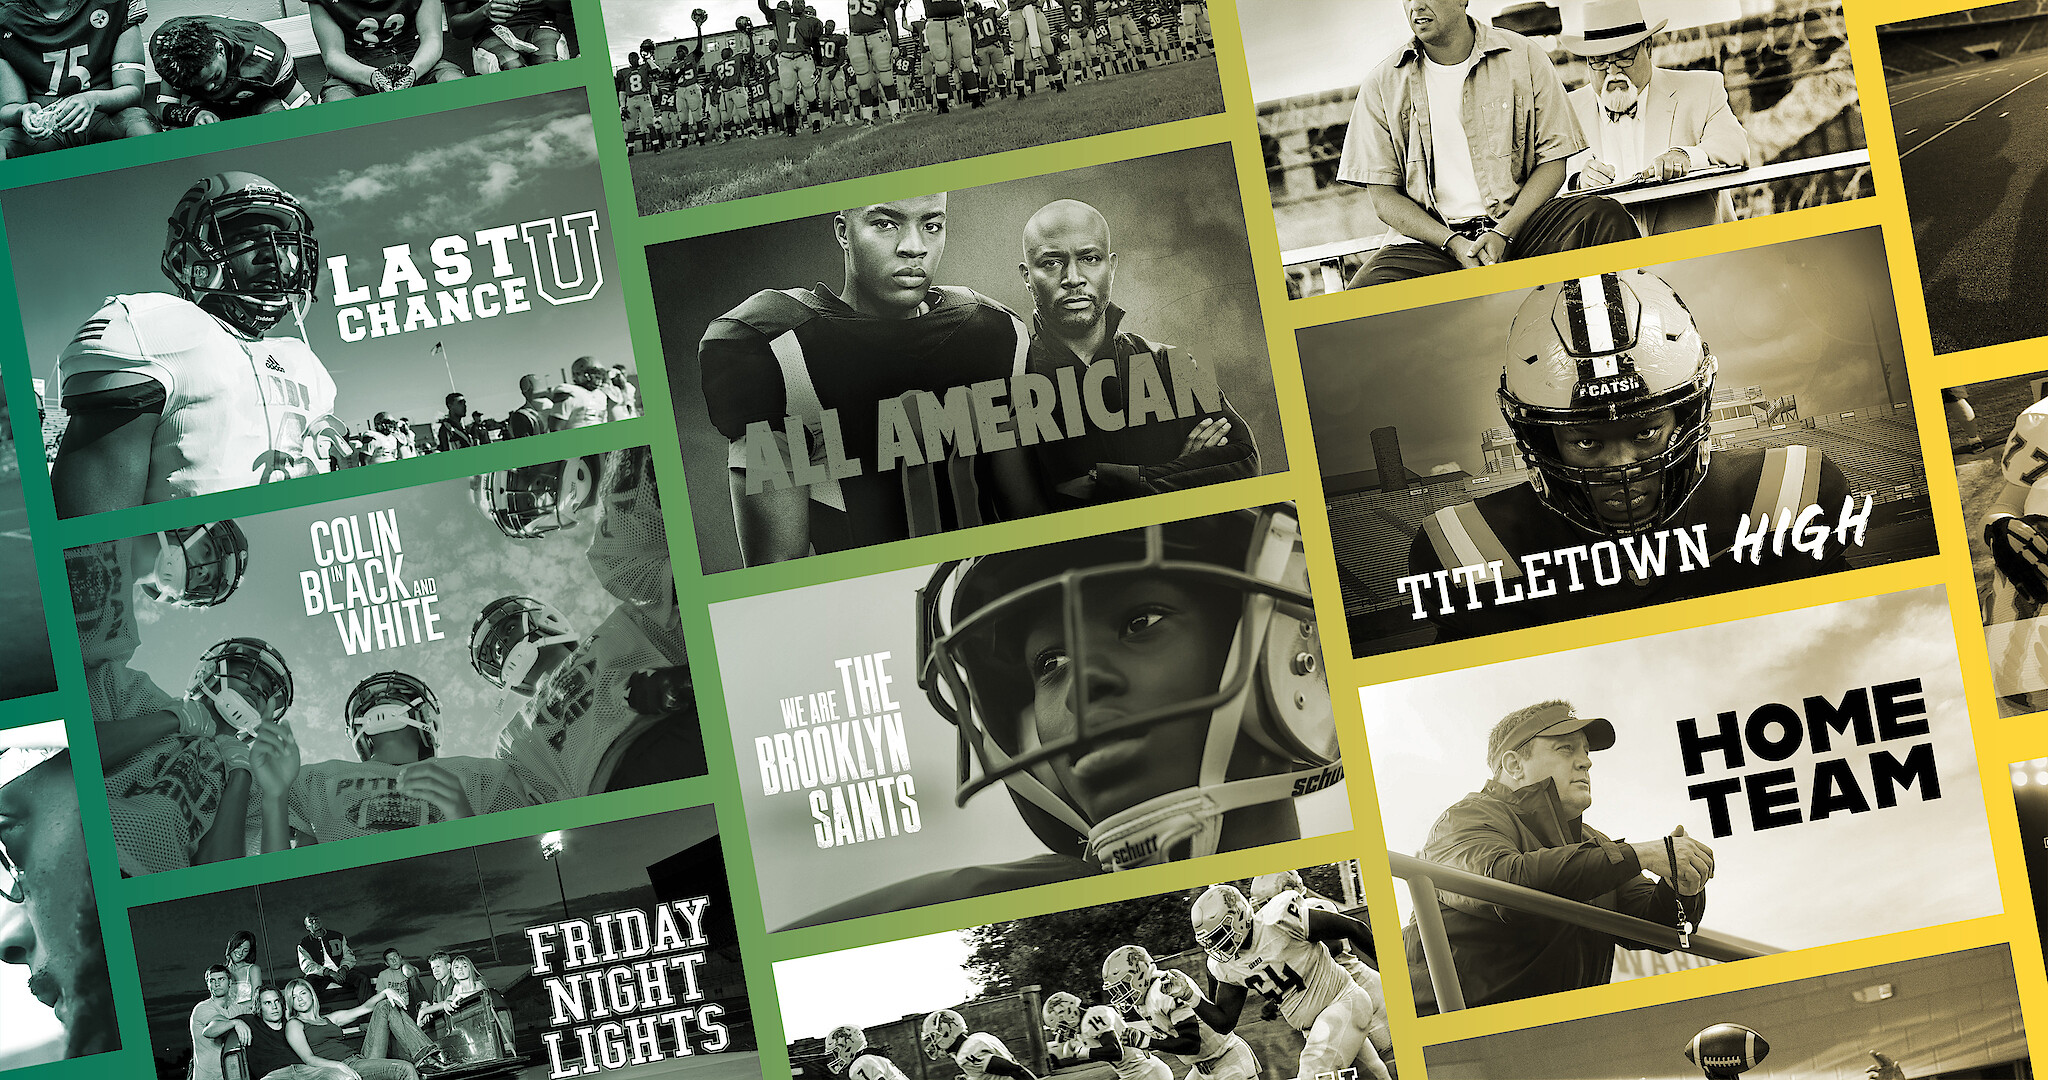 NEWS: 3 New Football Documentaries are Coming to Disney+!